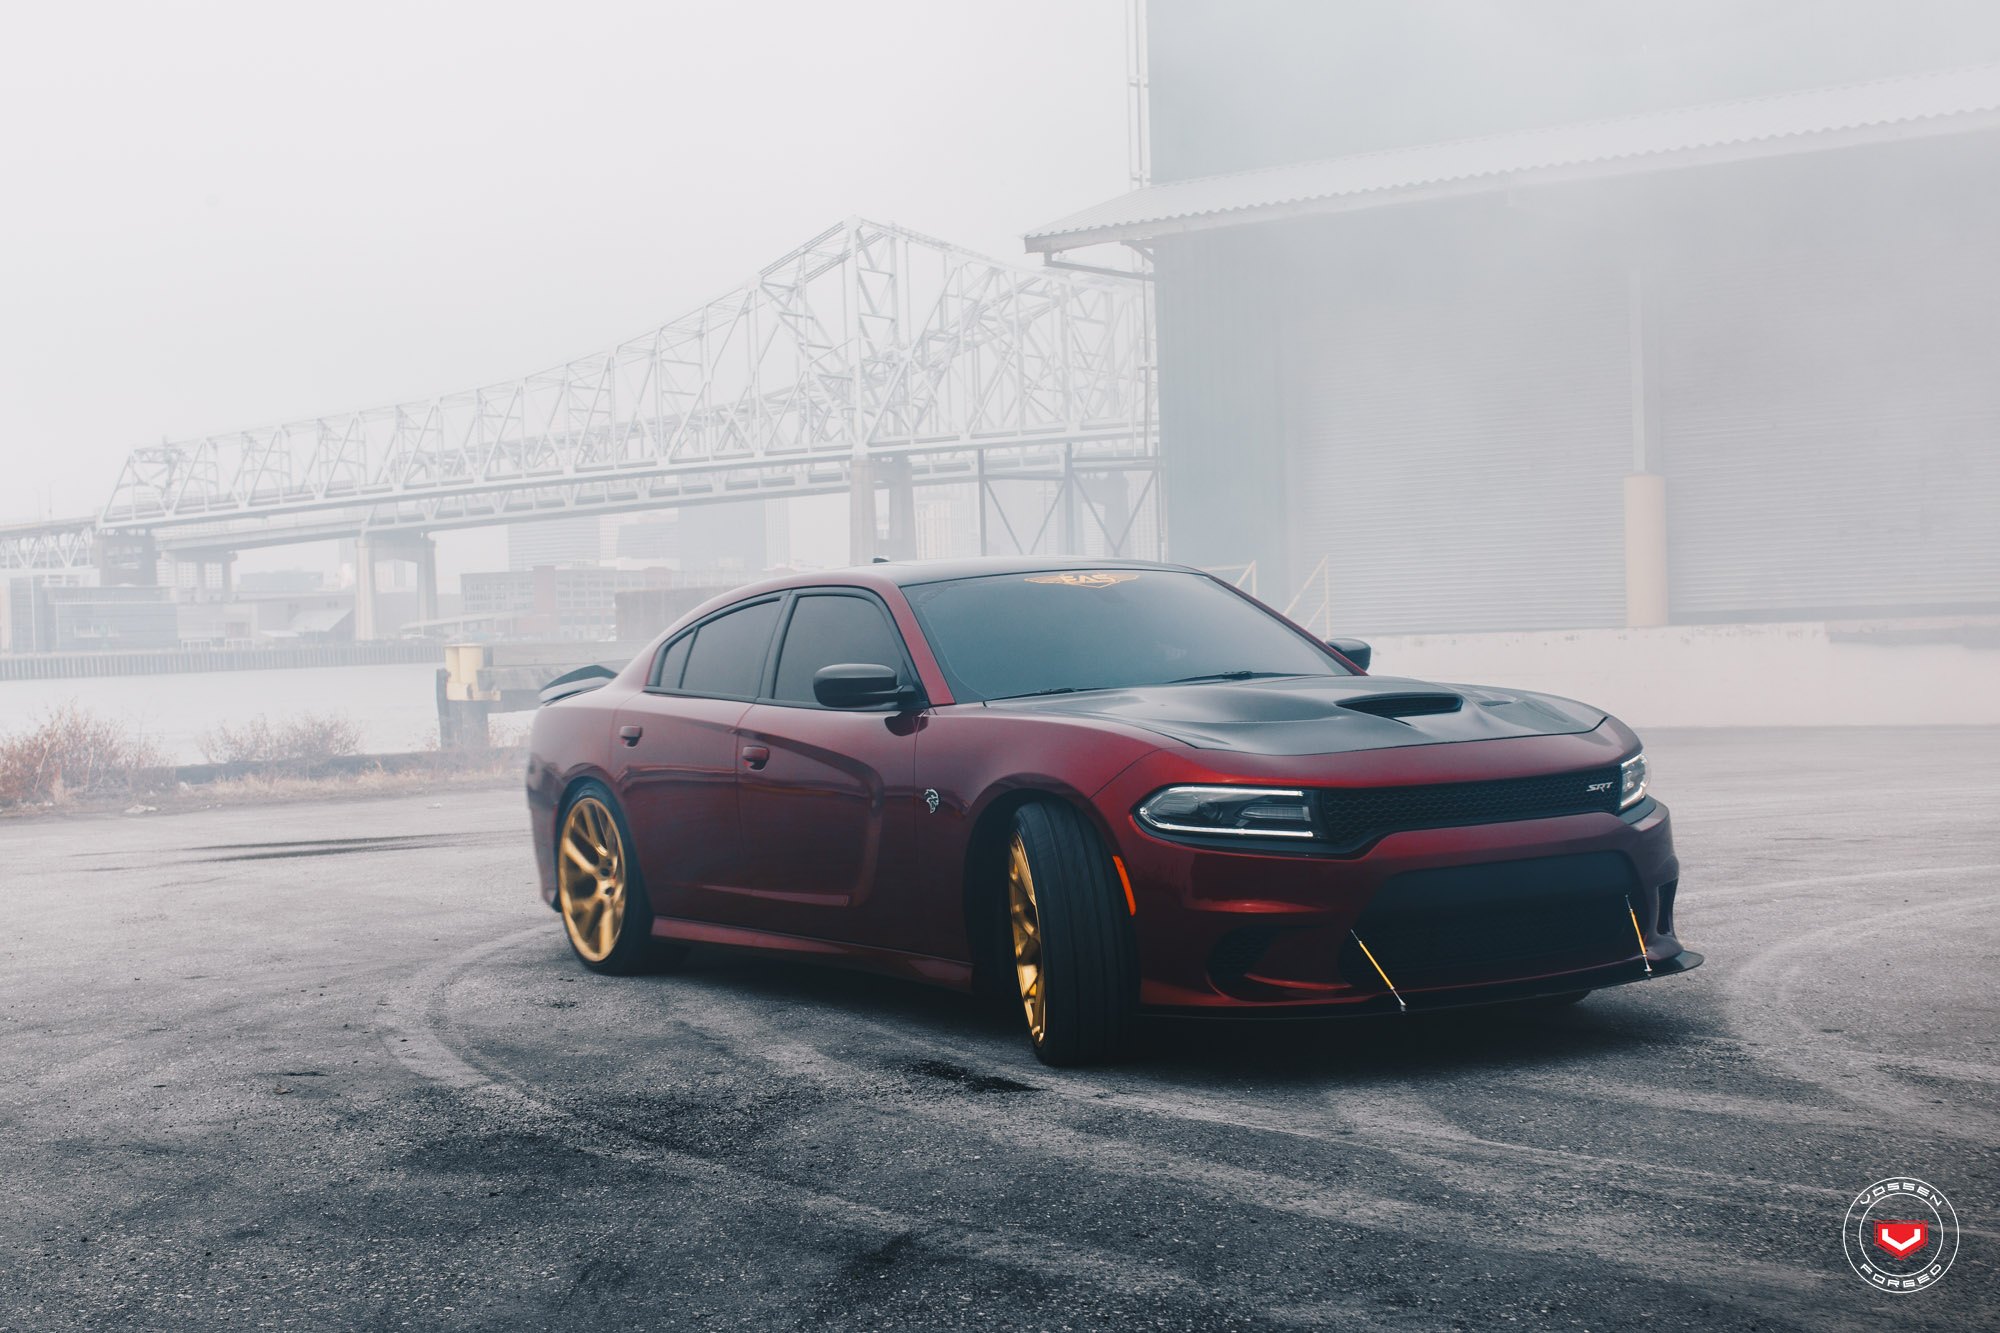 Aftermarket Front Lip on Red Dodge Charger SRT - Photo by Vossen